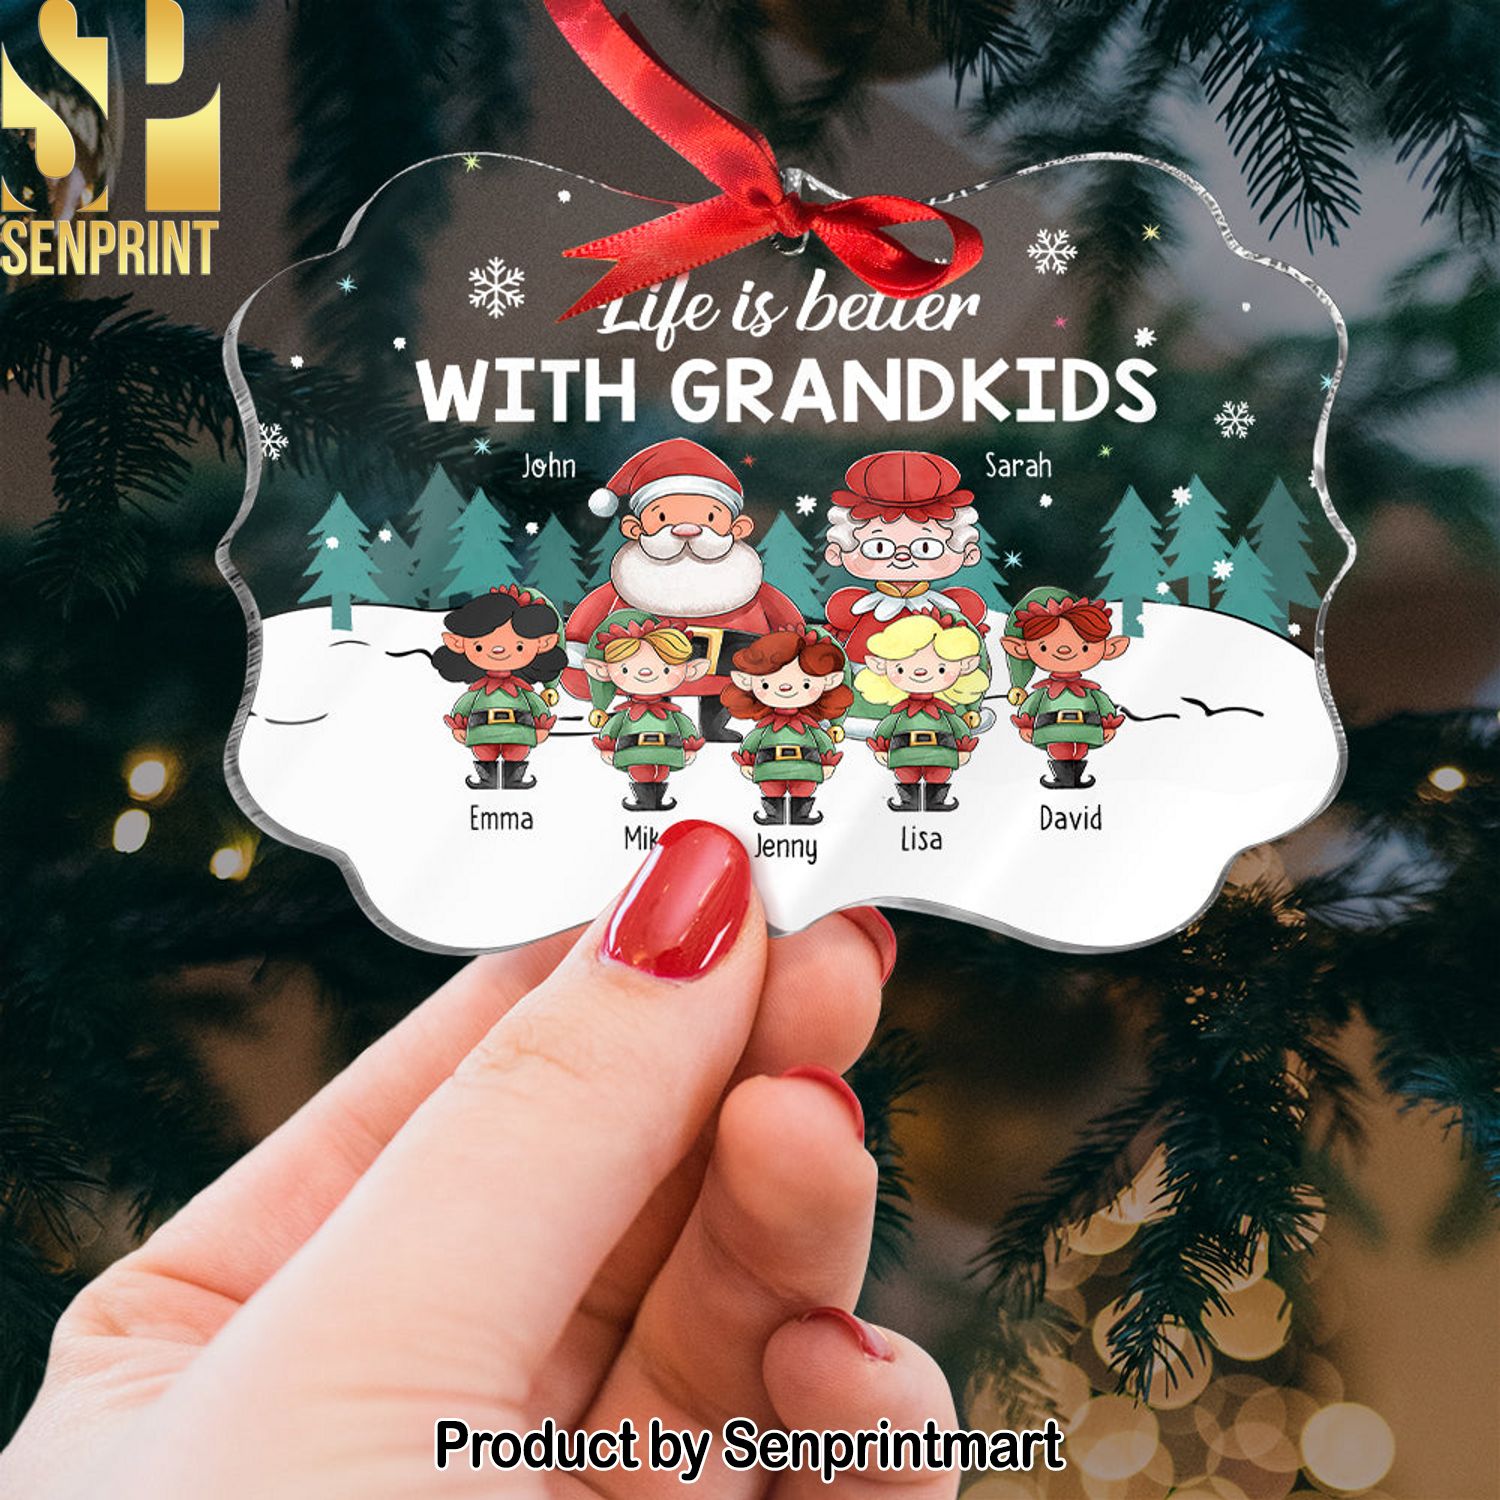 Life Is Better With Grandkids, Gift For Family, Personalized Acrylic Ornament, Grandkids Ornament, Christmas Gift